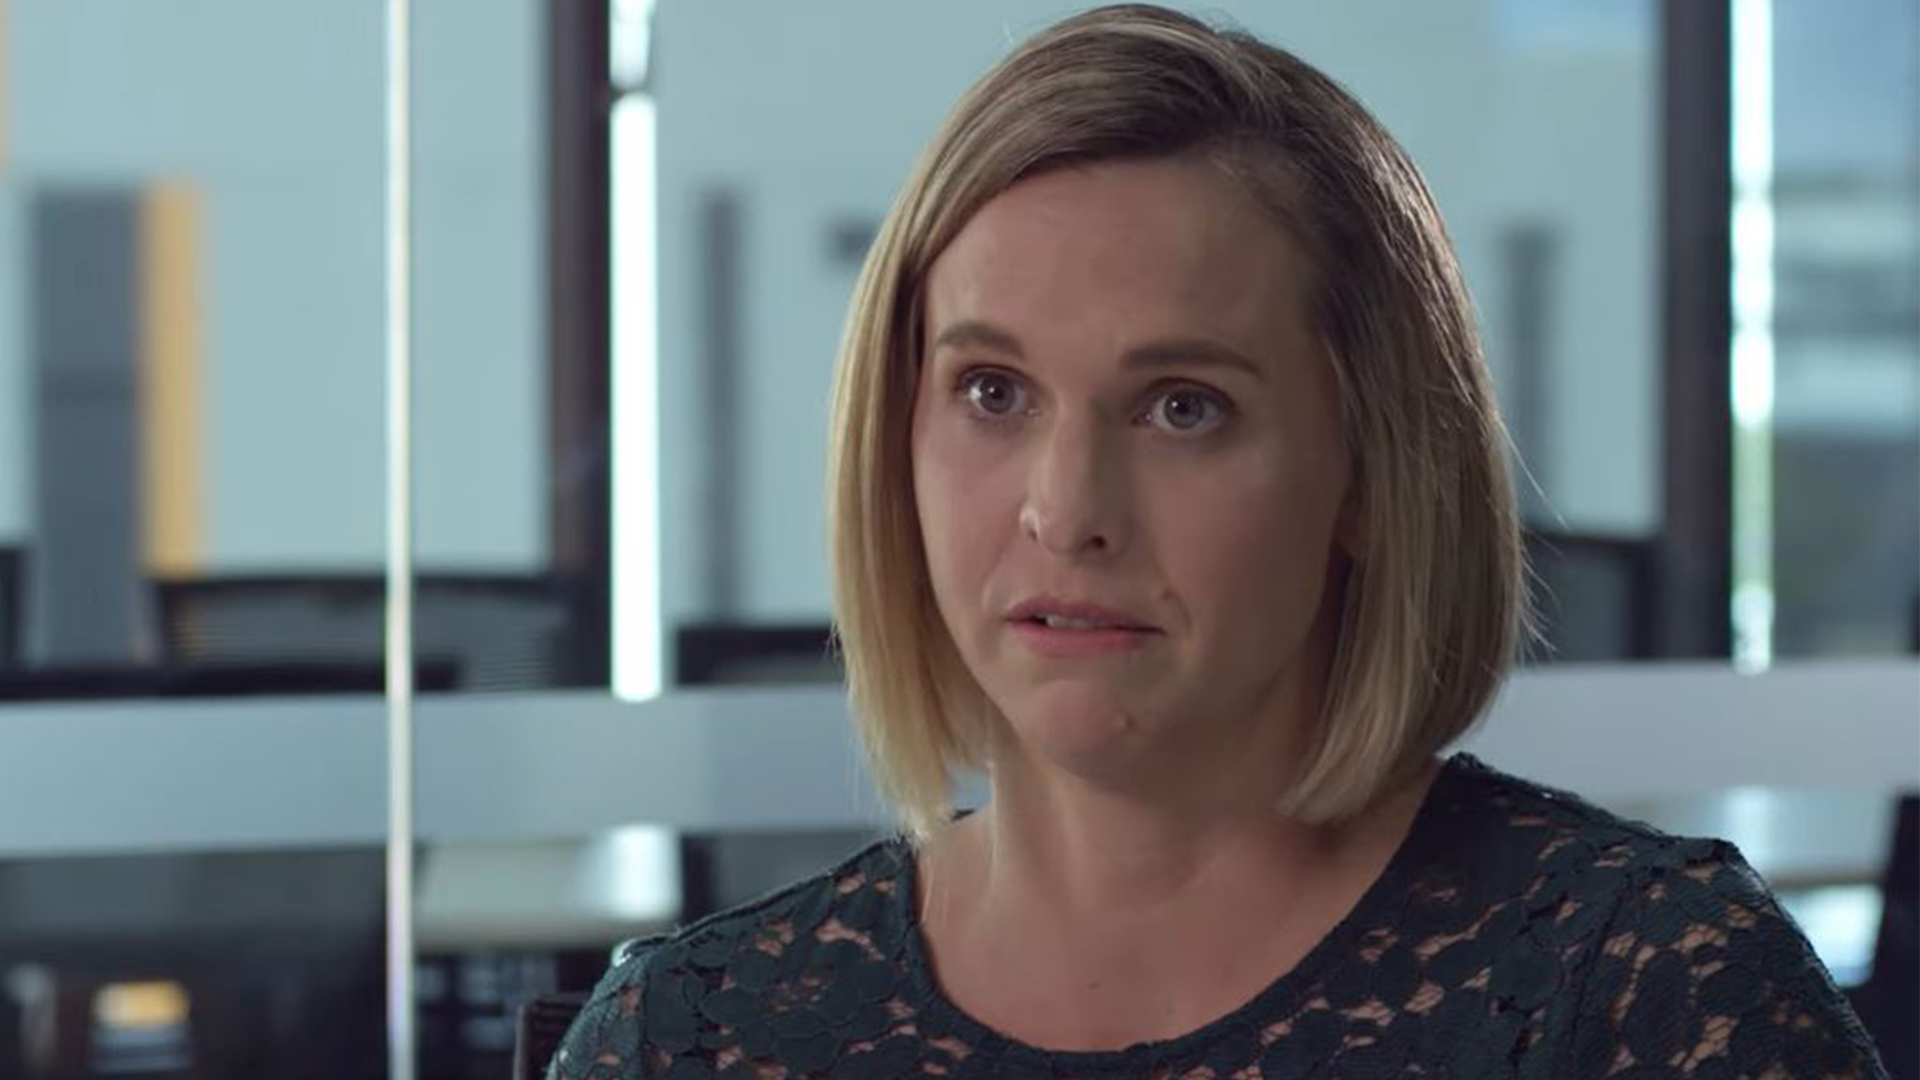 Former Olympic swimmer Libby Trickett opens up on mental health struggles.